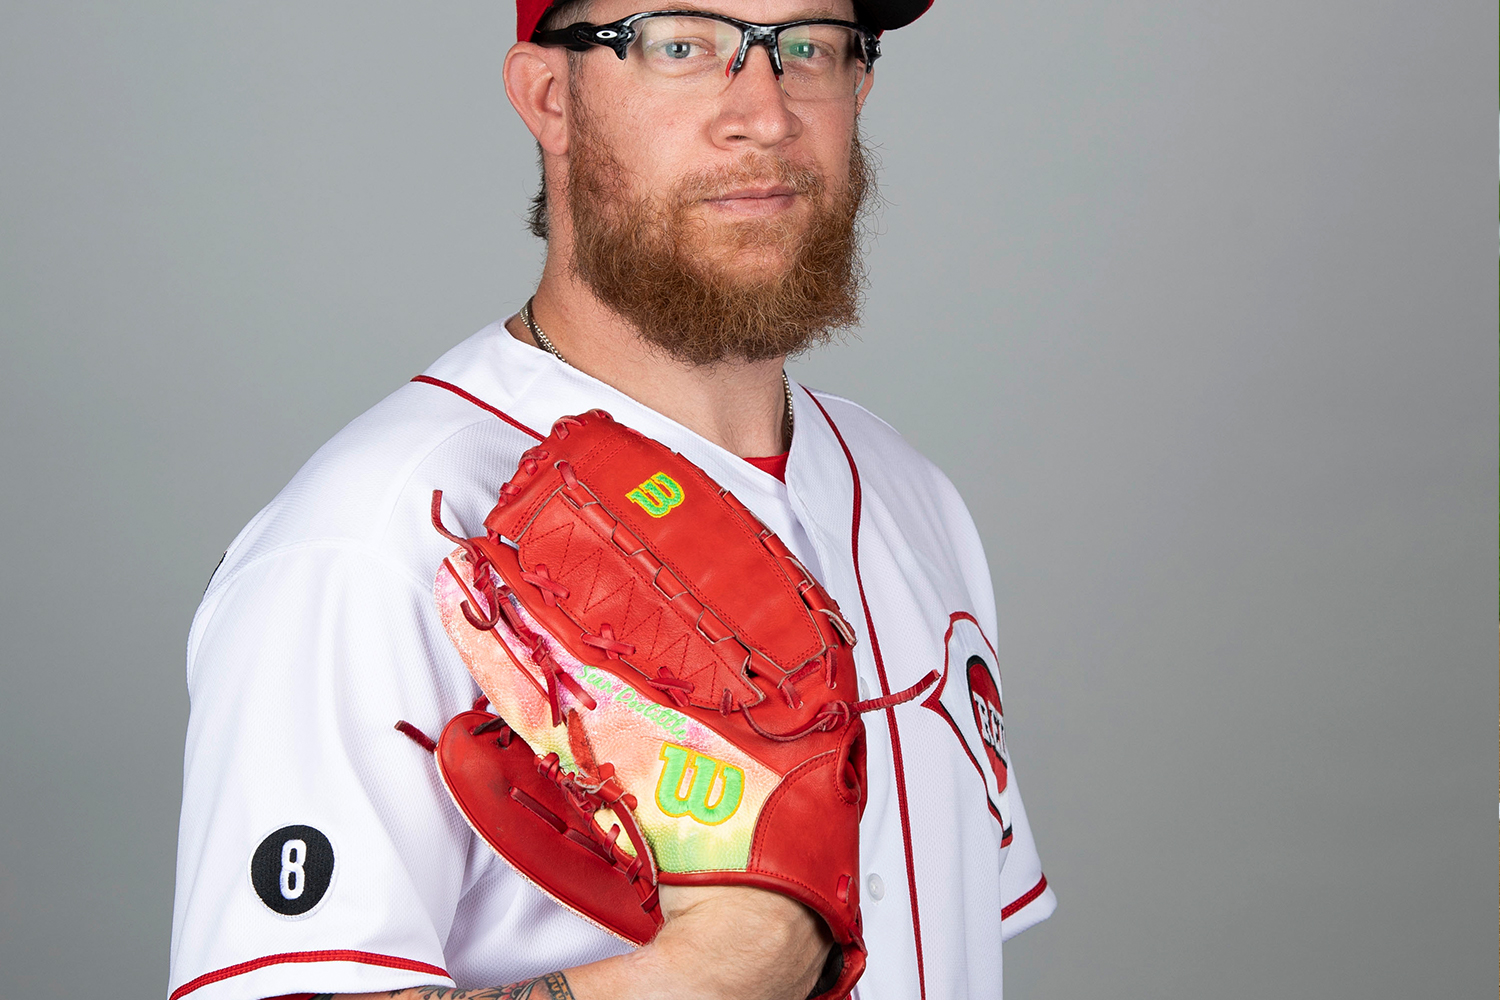 Sean Doolittle #63 of the Cincinnati Reds poses during Photo Day on Tuesday, February 23, 2021